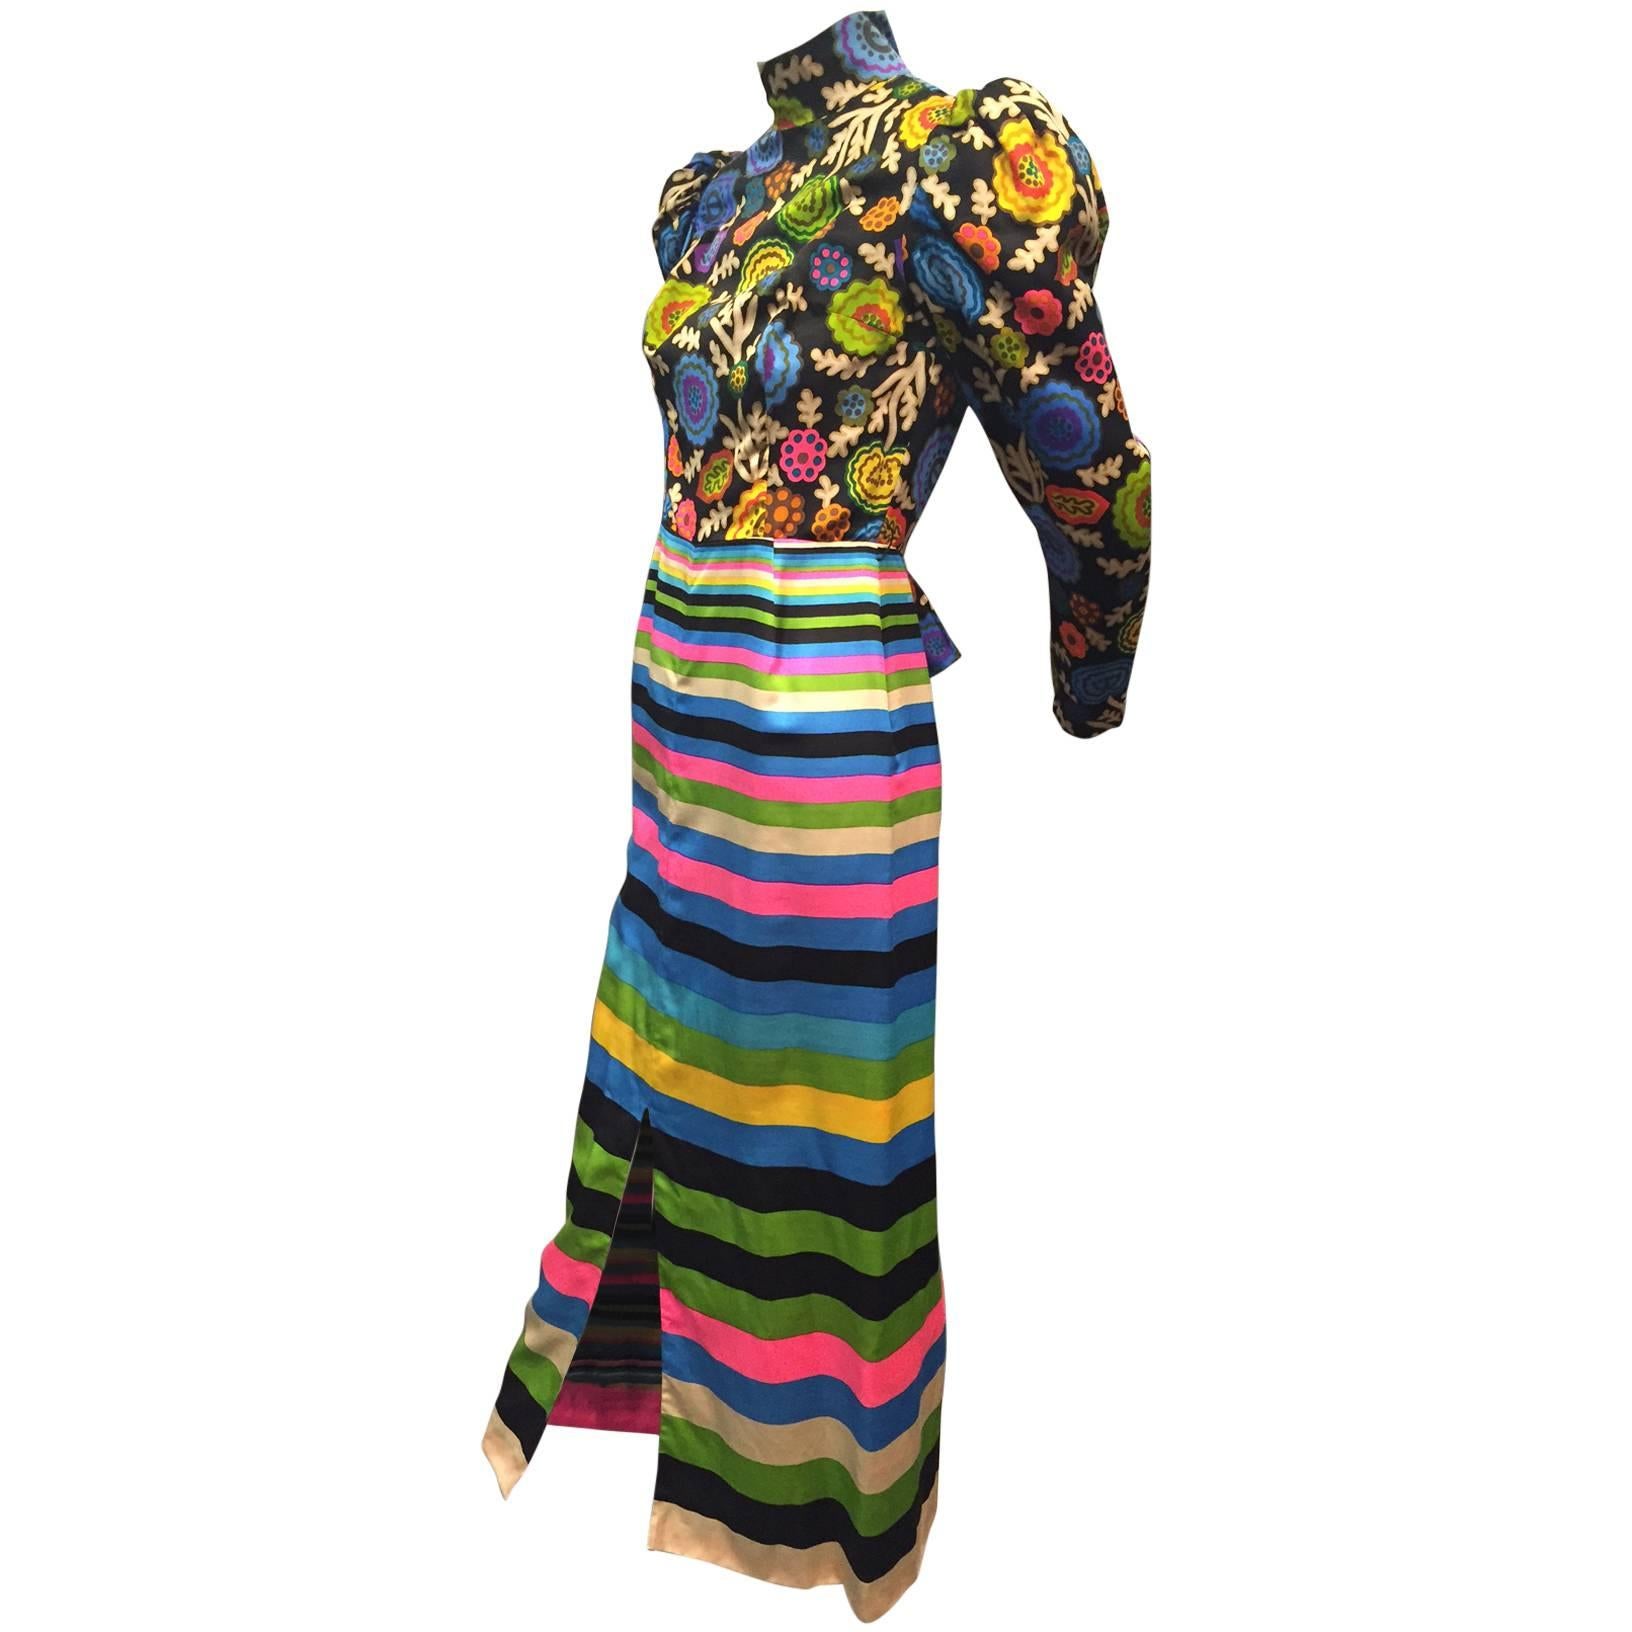 A fabulous 1960s Lanvin polished cotton maxi dress in vivid stripes and florals:  Structured leg-o-mutton sleeves with zippered cuffs, back zipper and center front slit. Missing original belt. 